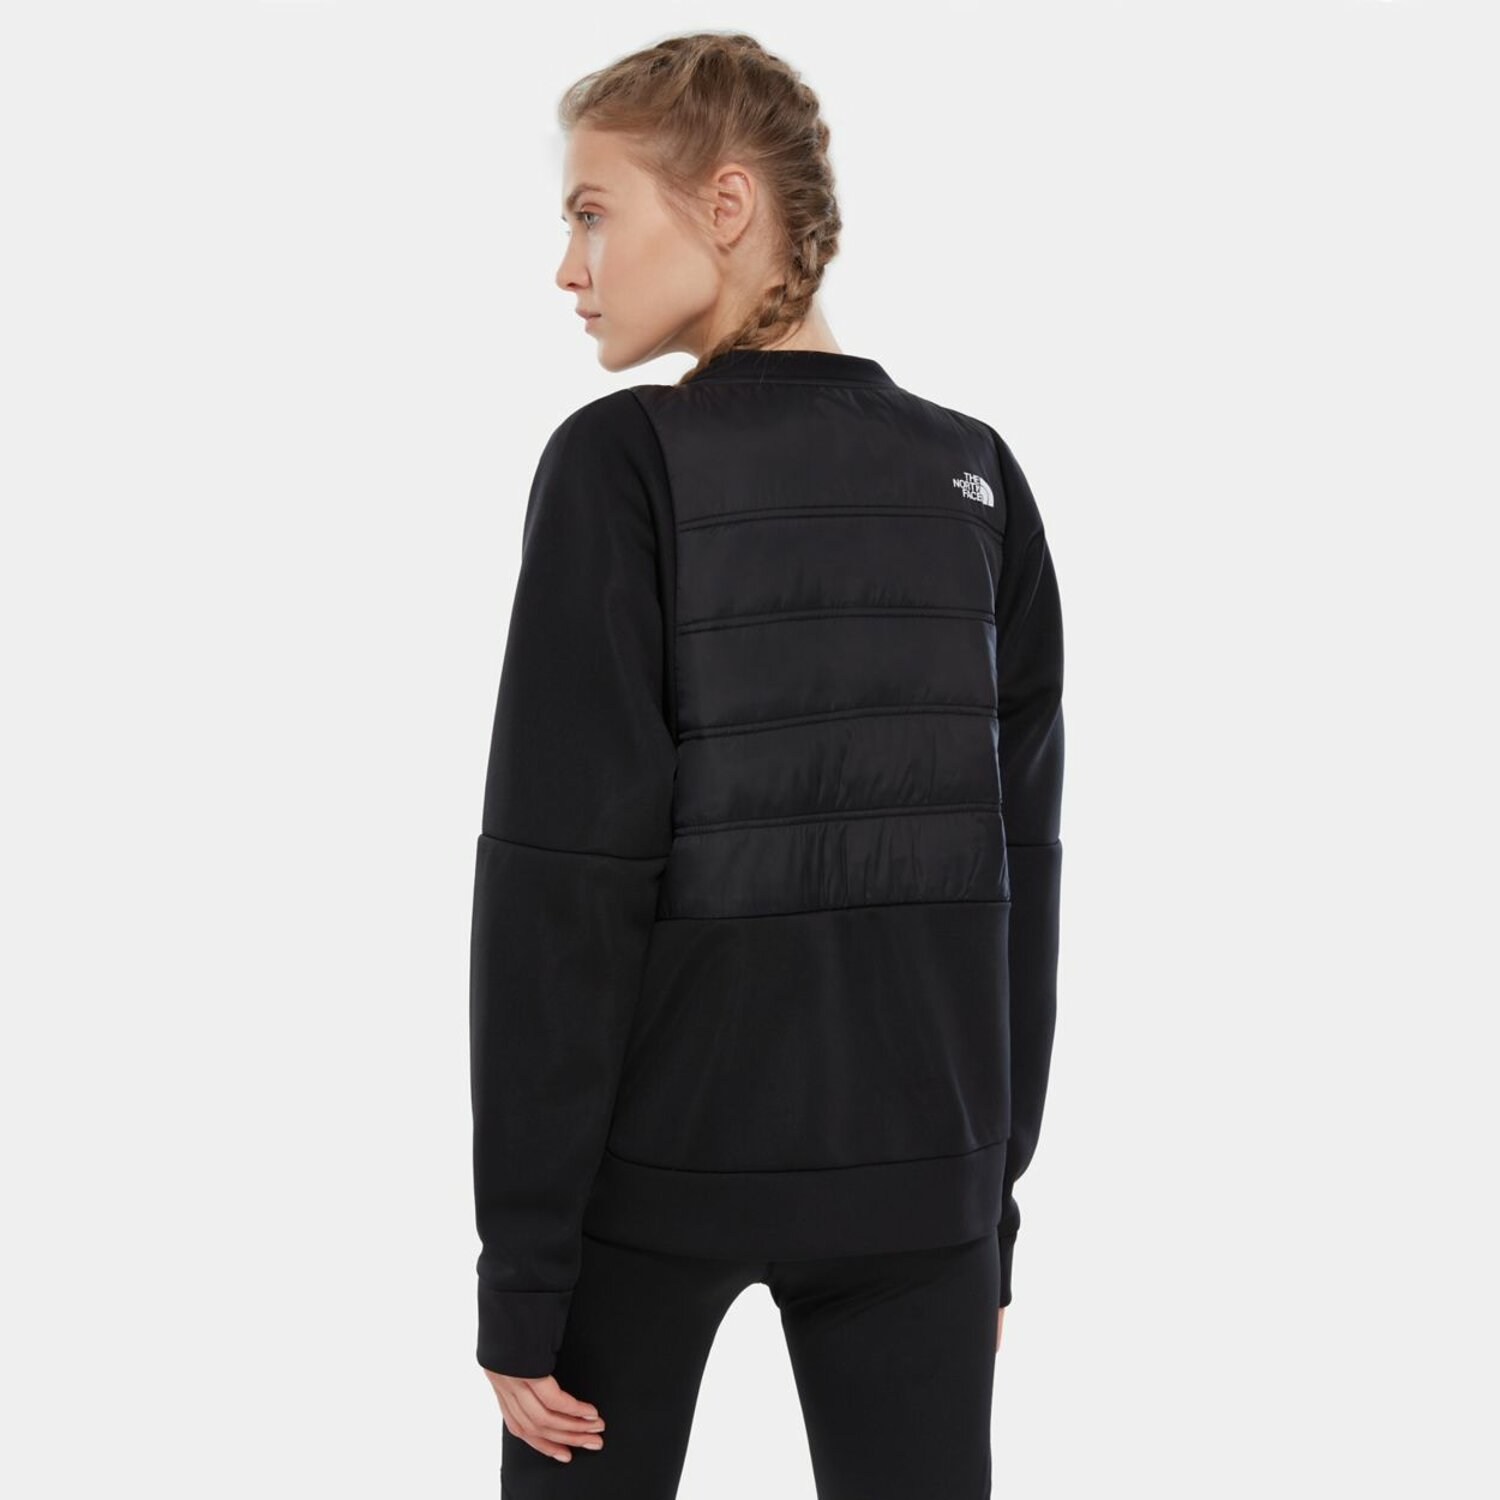 THE NORTH FACE NF0A3X3Y WOMEN INFINITY TRAIN INSULATED MONT SIZE M4